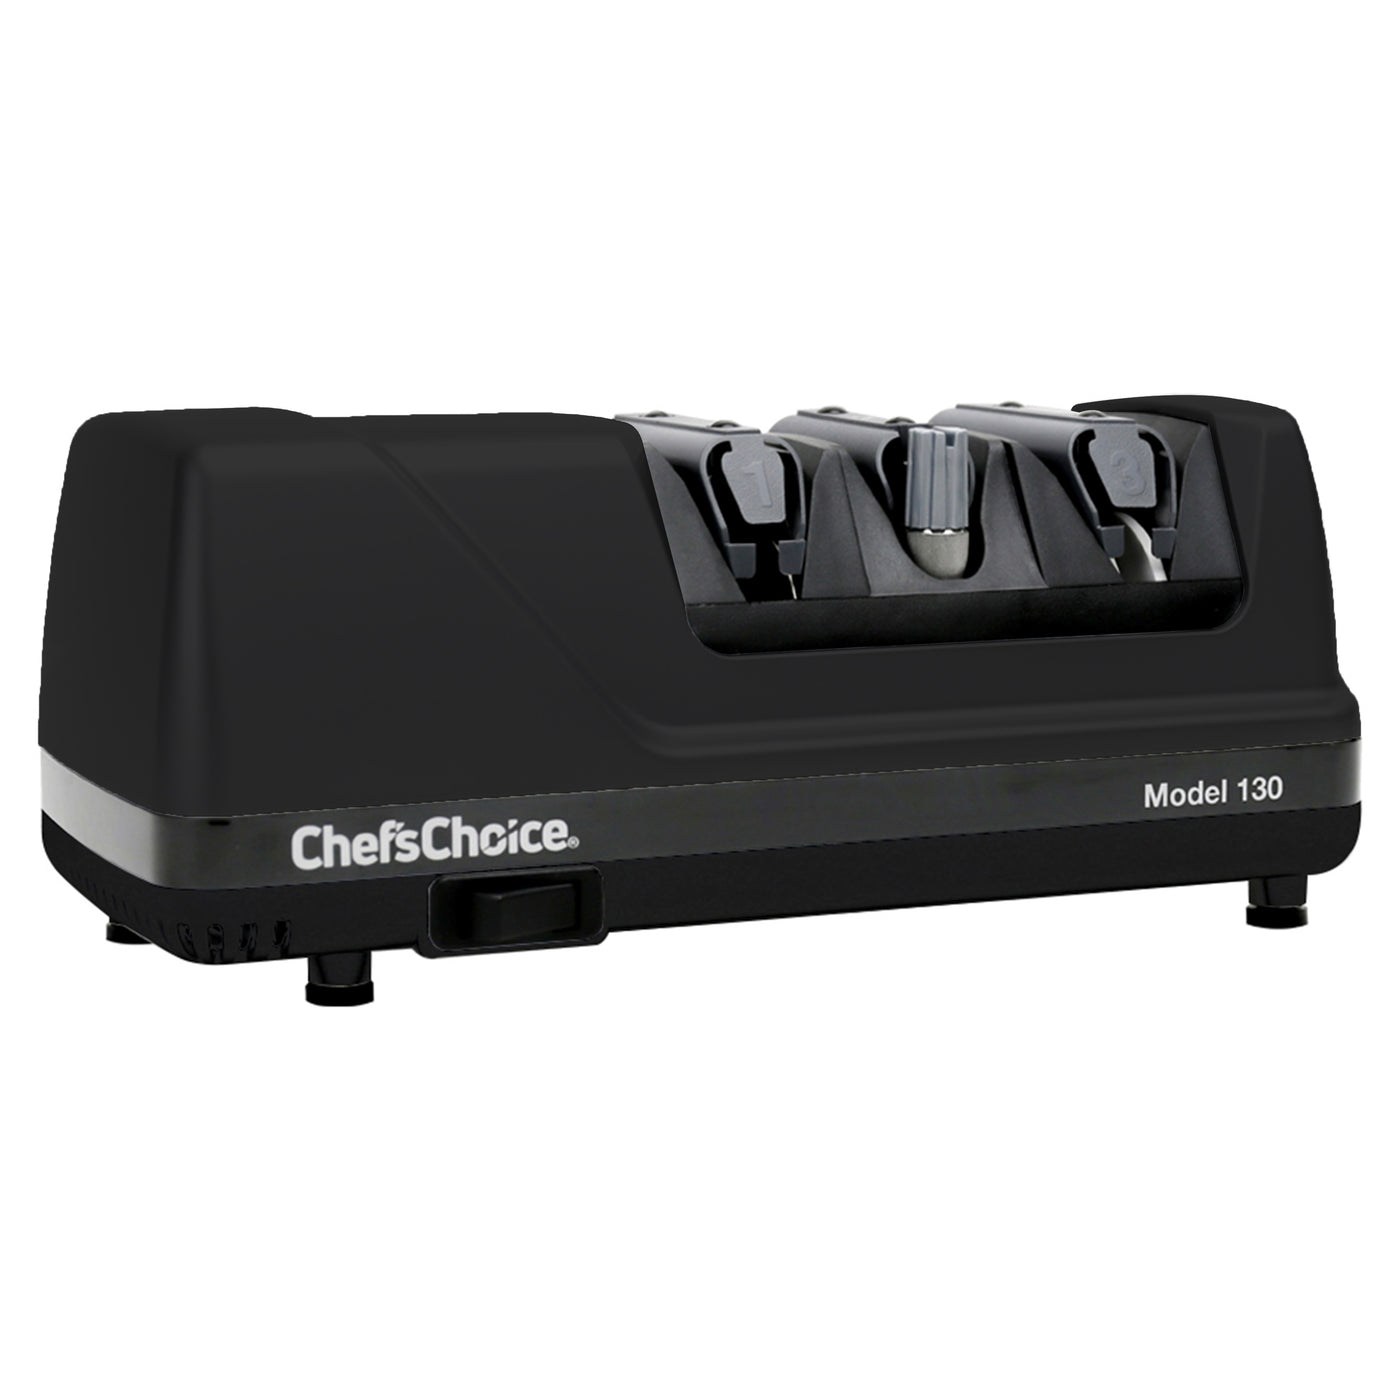 Chef&s Choice Professional Knife-Sharpening Station